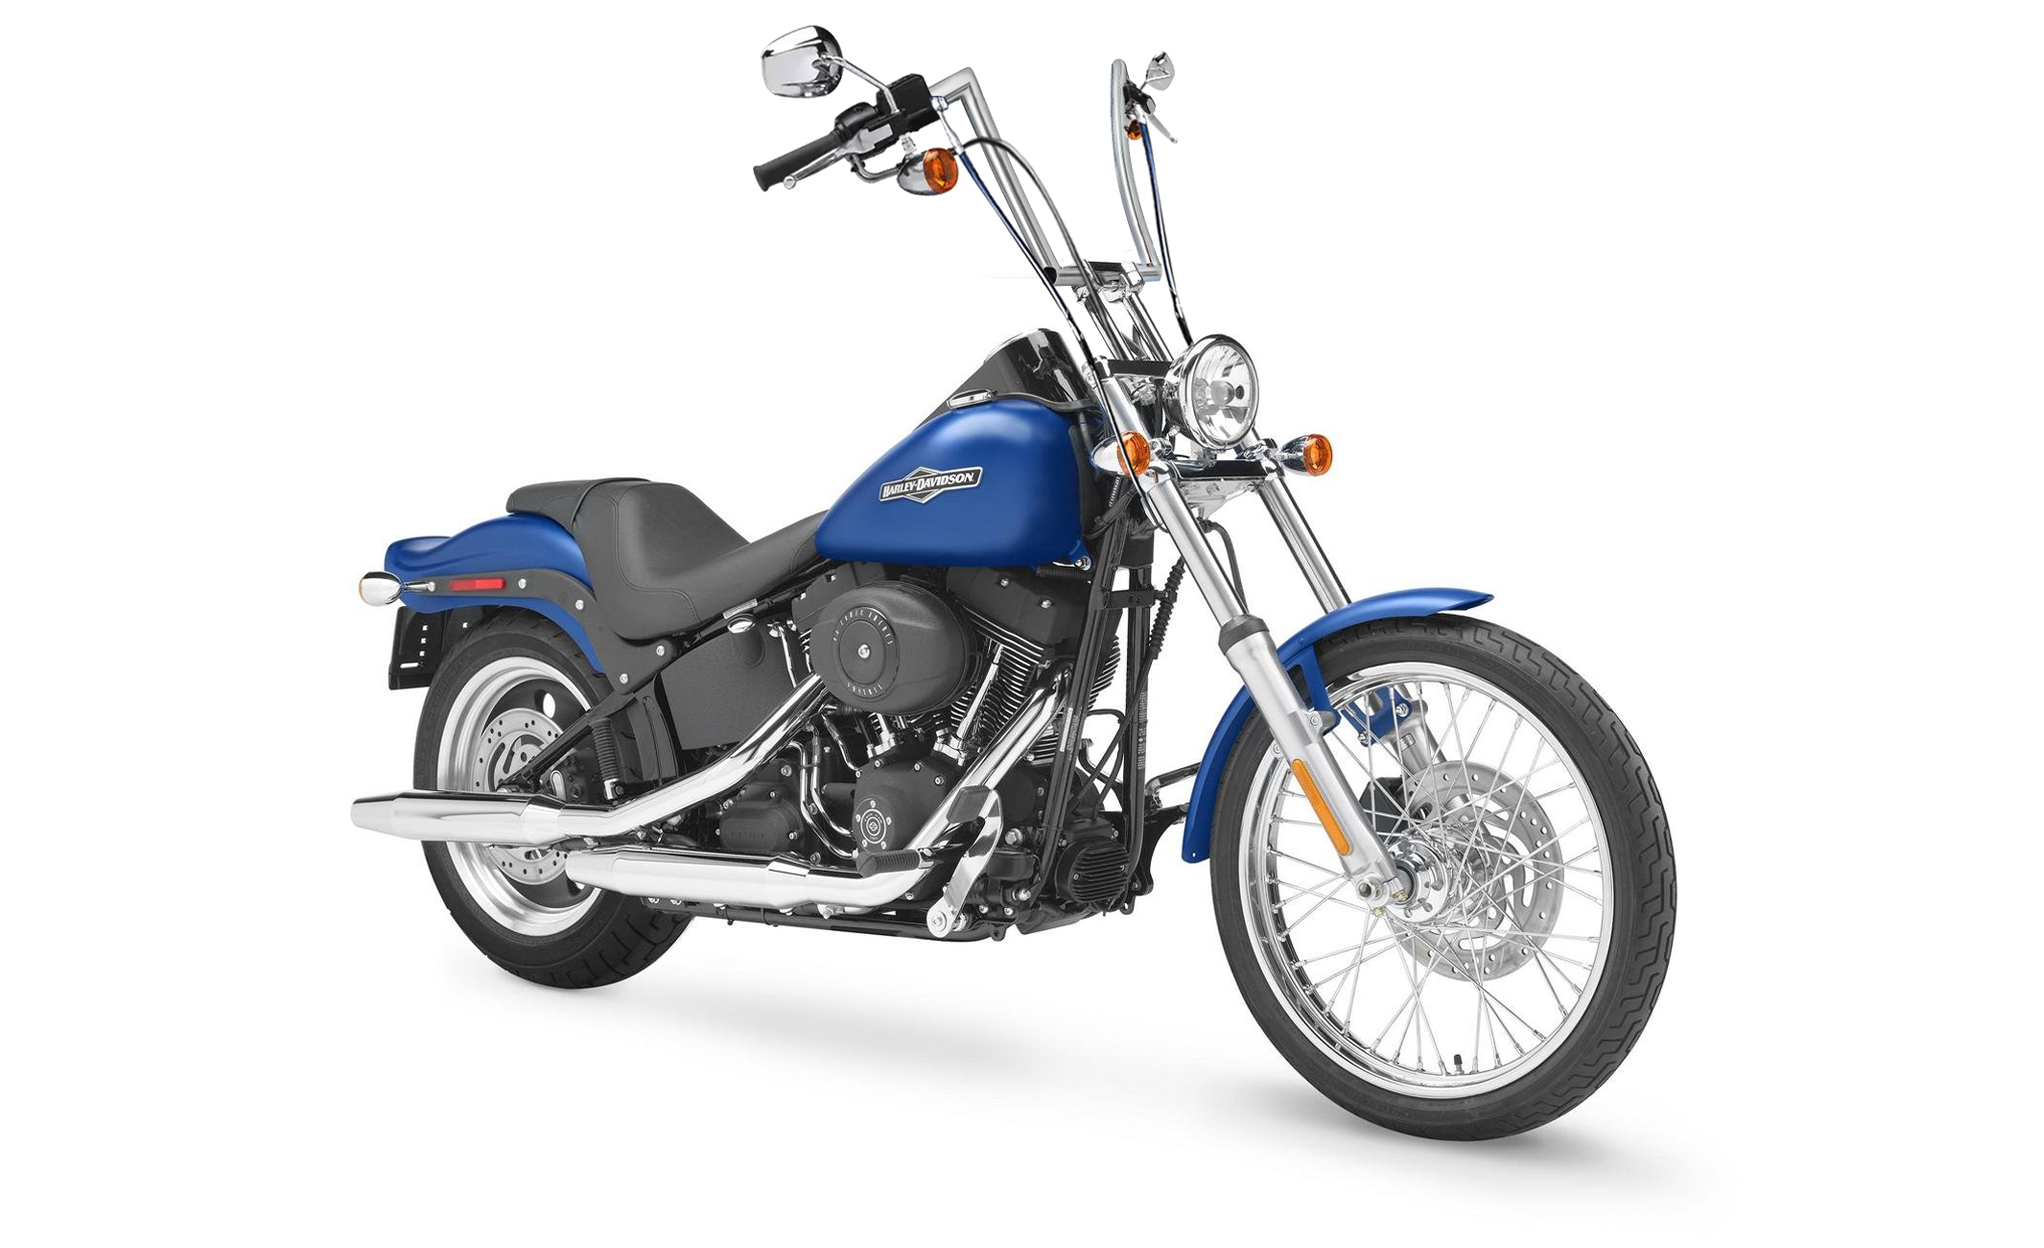 Viking Iron Born 9" Handlebar for Harley Dyna Low Rider FXDL Chrome Bag on Bike View @expand